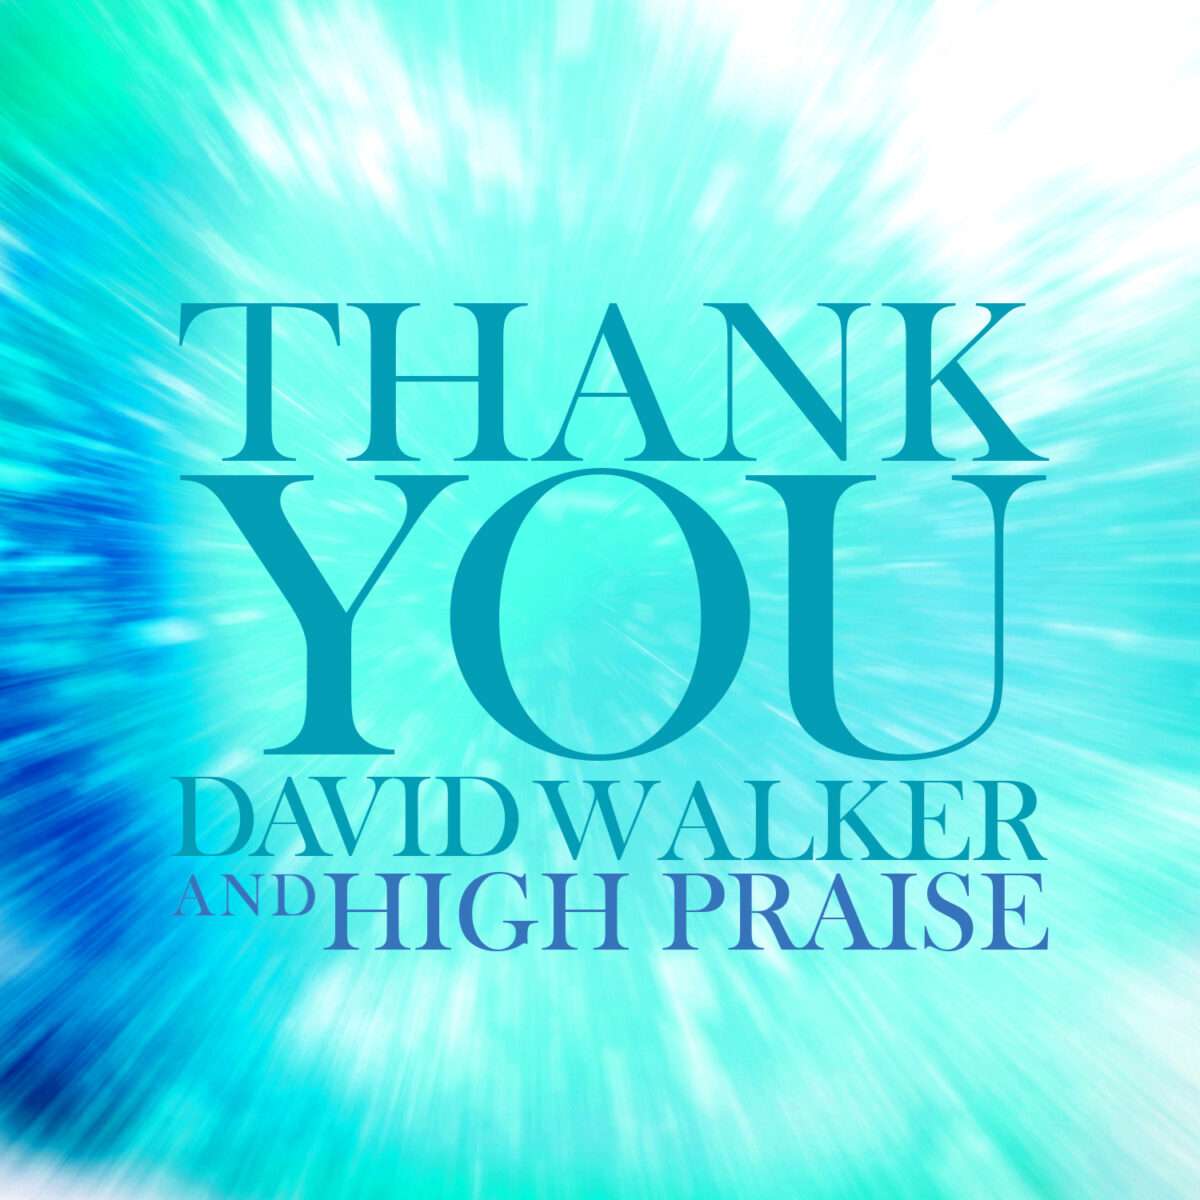 david-walker-and-high-praise-display-gratitude-with-new-track